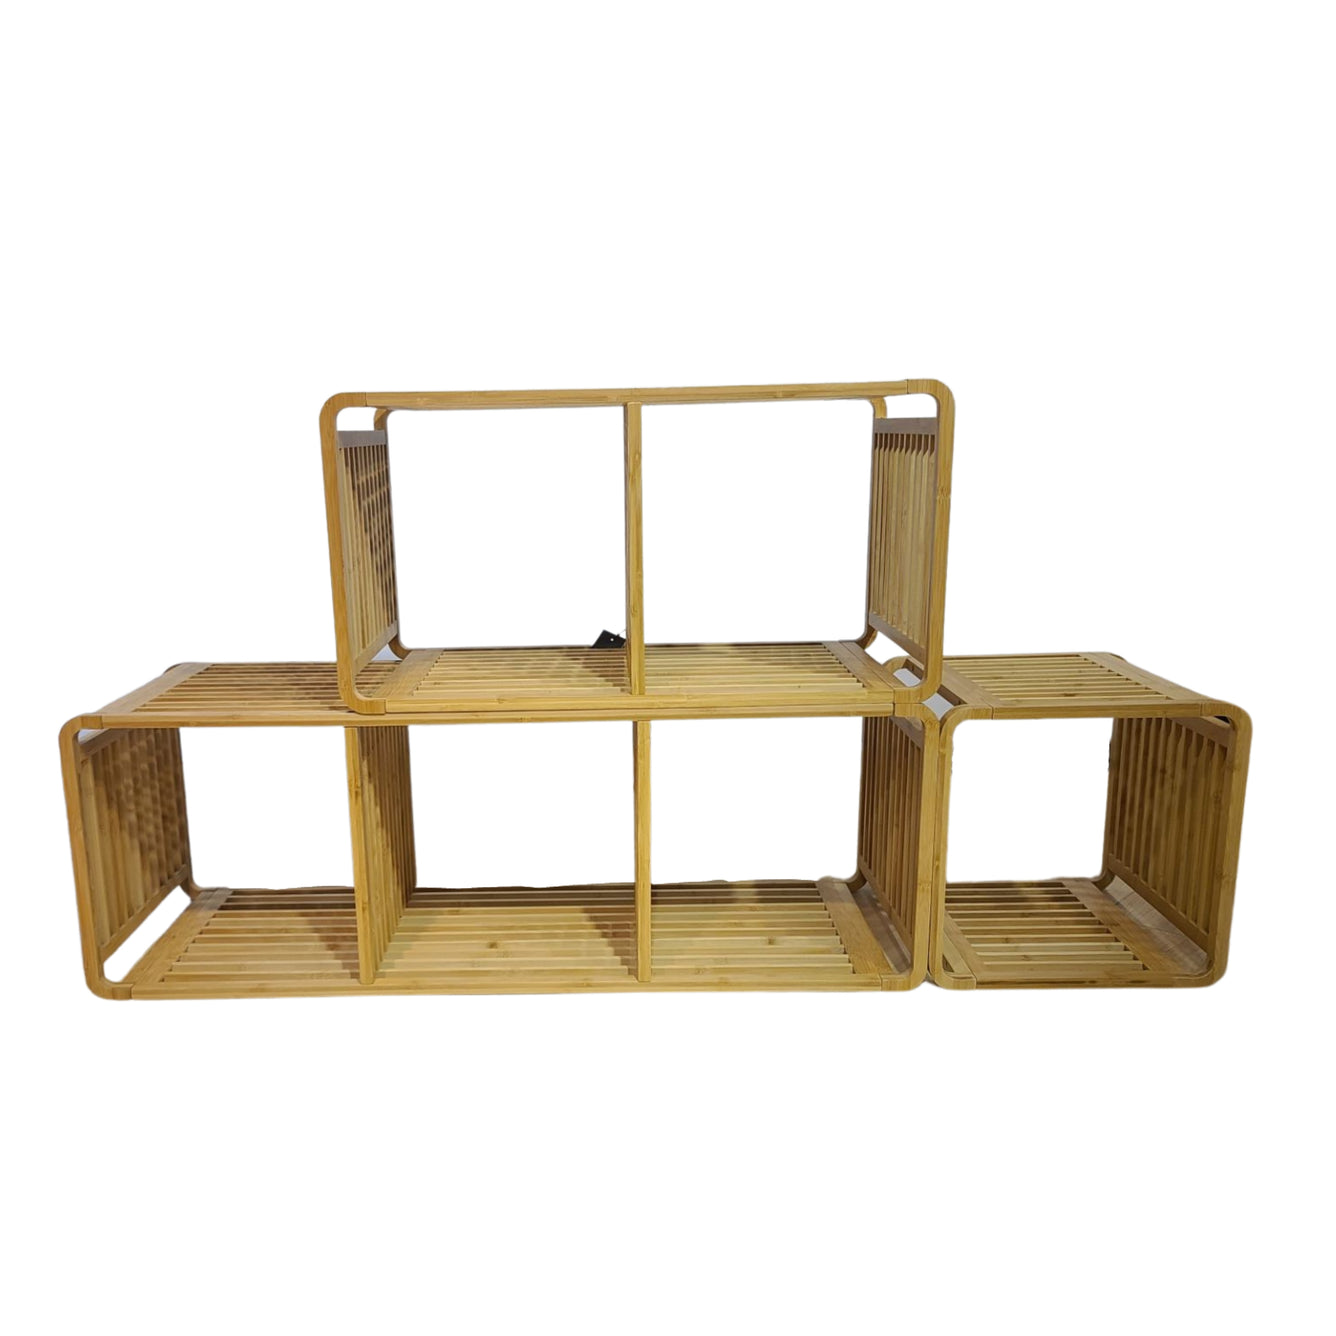 Bamboo square rack